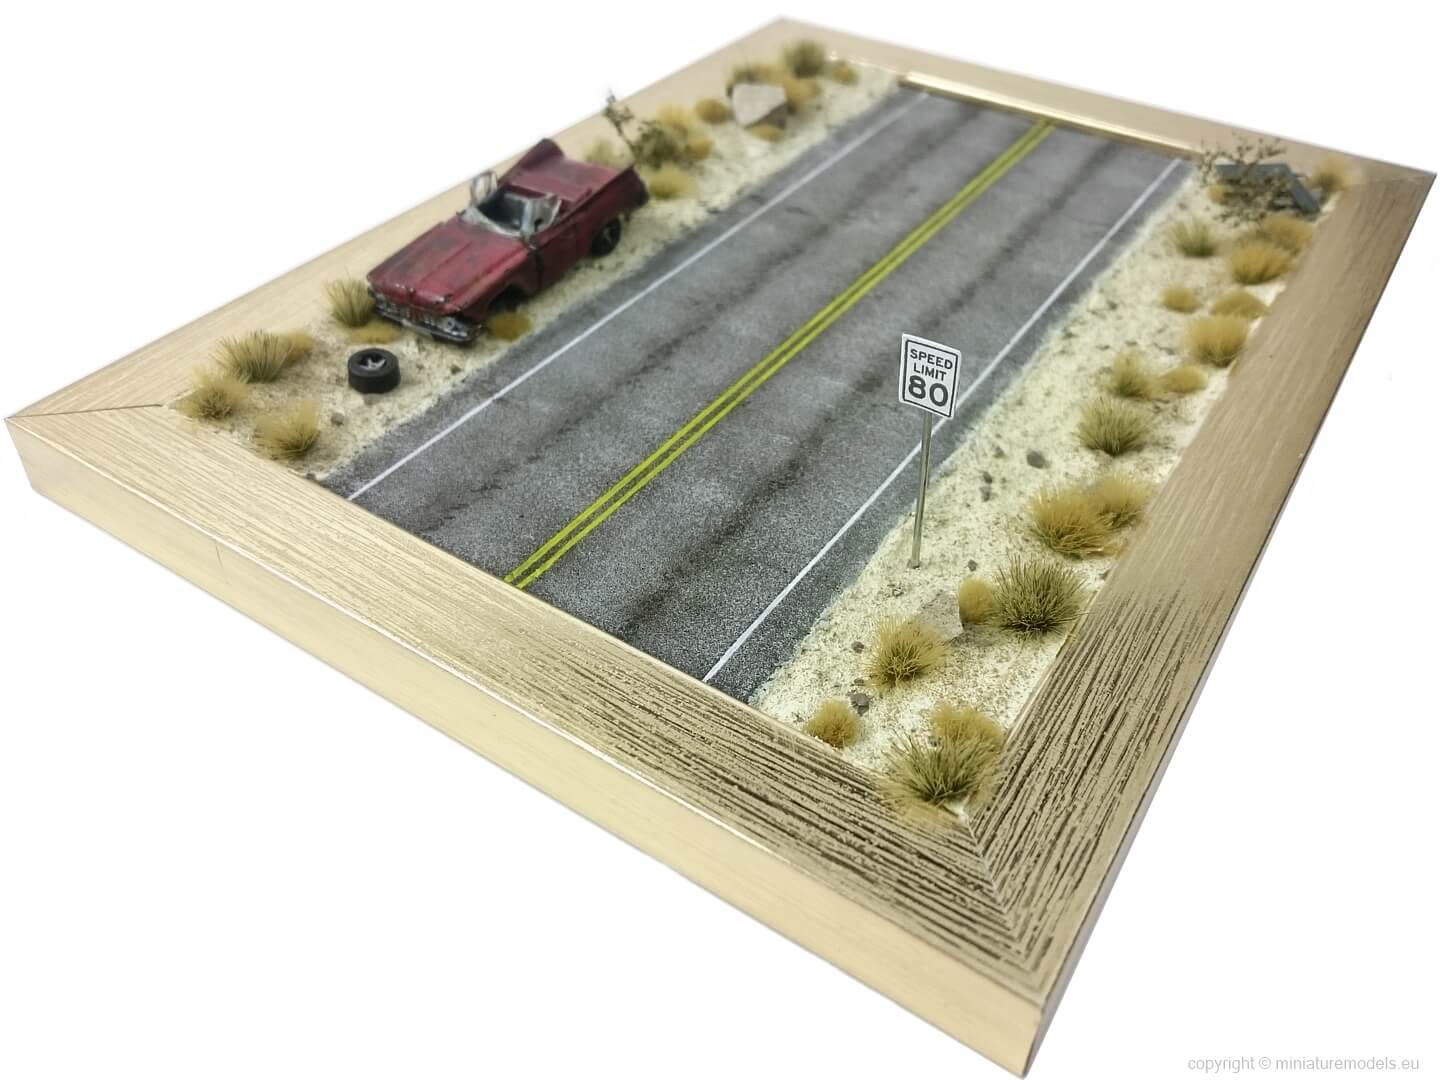 Diorama of amercian road in 1:87 scale